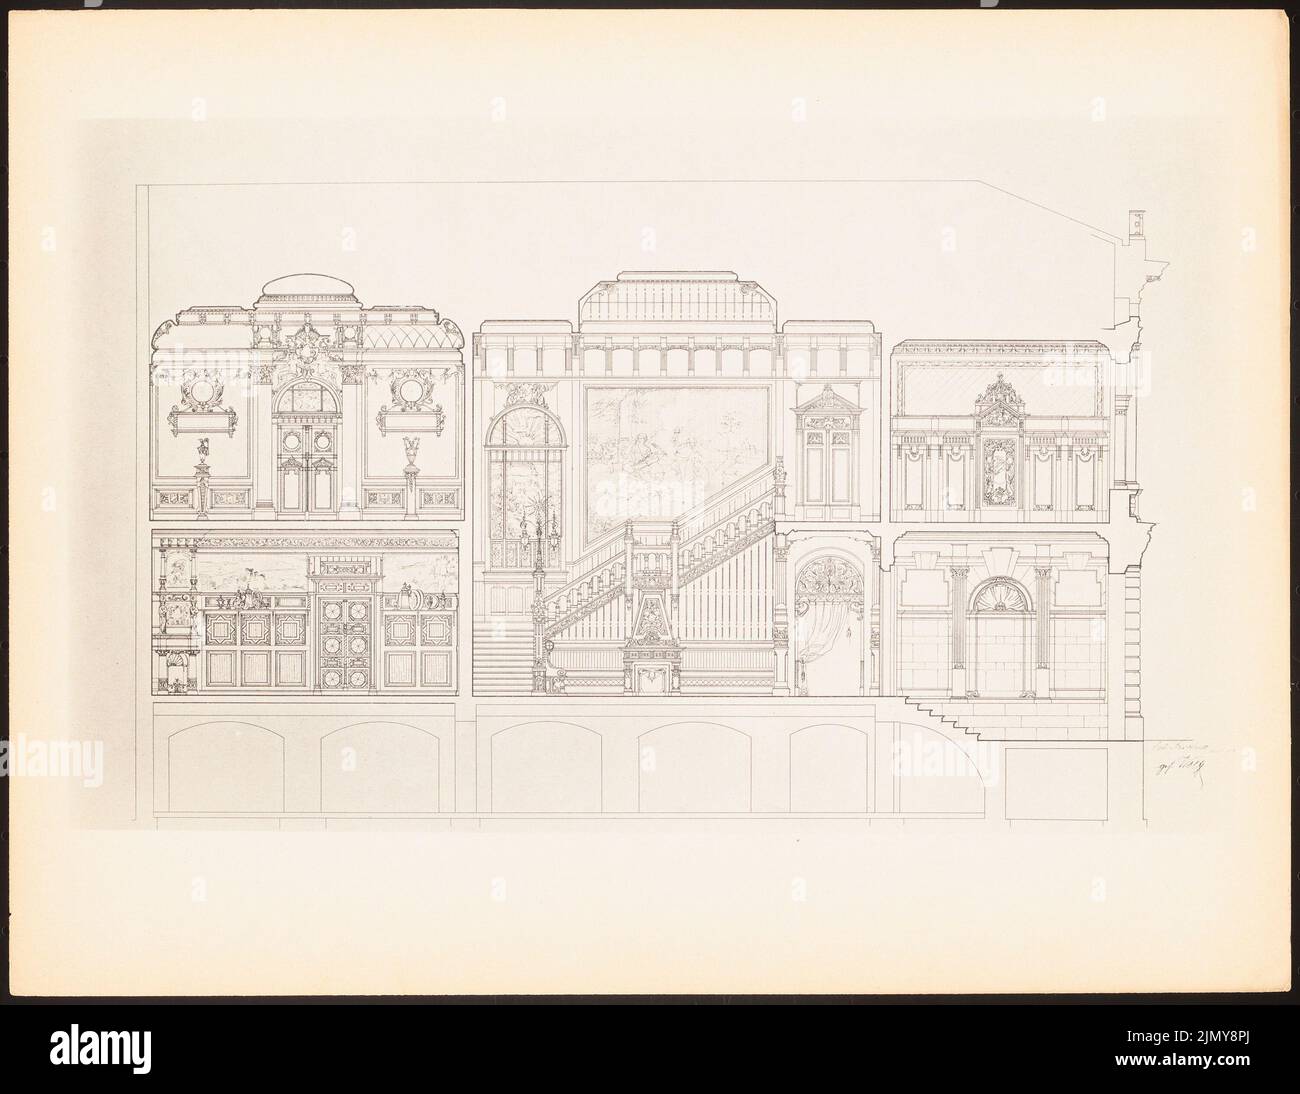 Kutschen, Stadtpalais. (From: Prints of seminar works by the Royal Technical University of Berlin, Vol. II) (1890-1902): Longitudinal section. Print on paper, 25.5 x 33 cm (including scan edges) Stock Photo